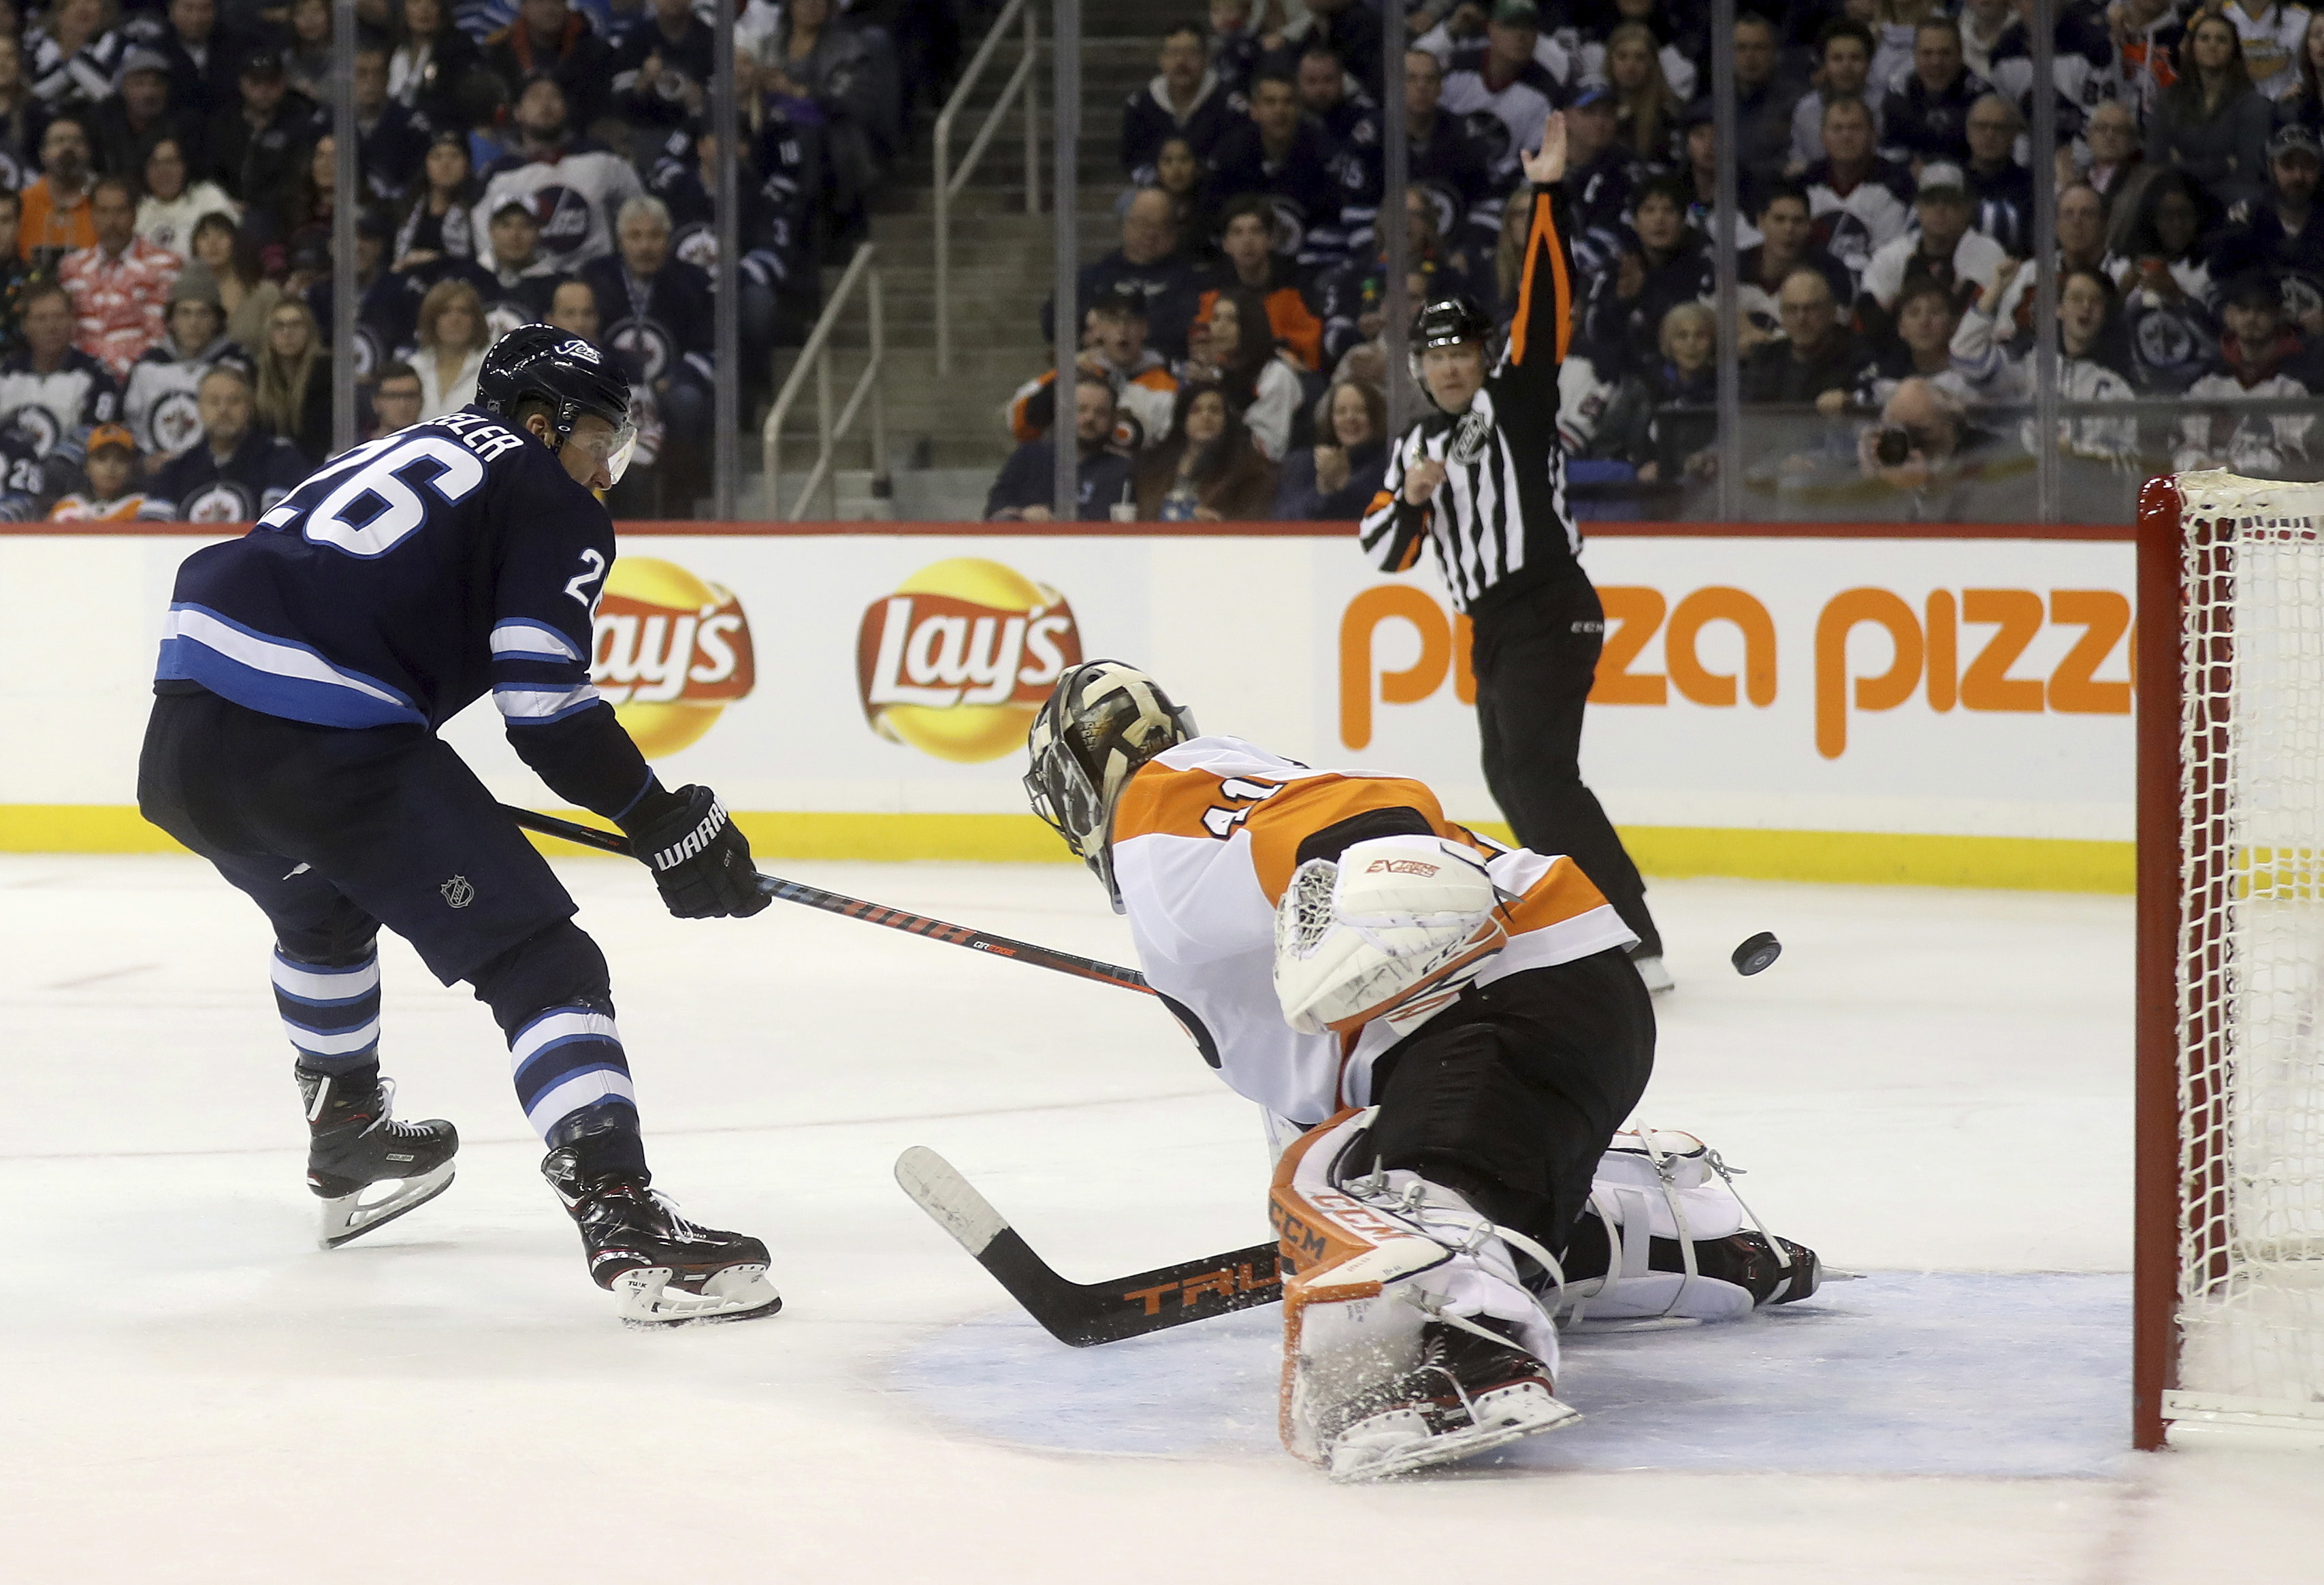 Jets get 3 on power play, rout Flyers 7-1